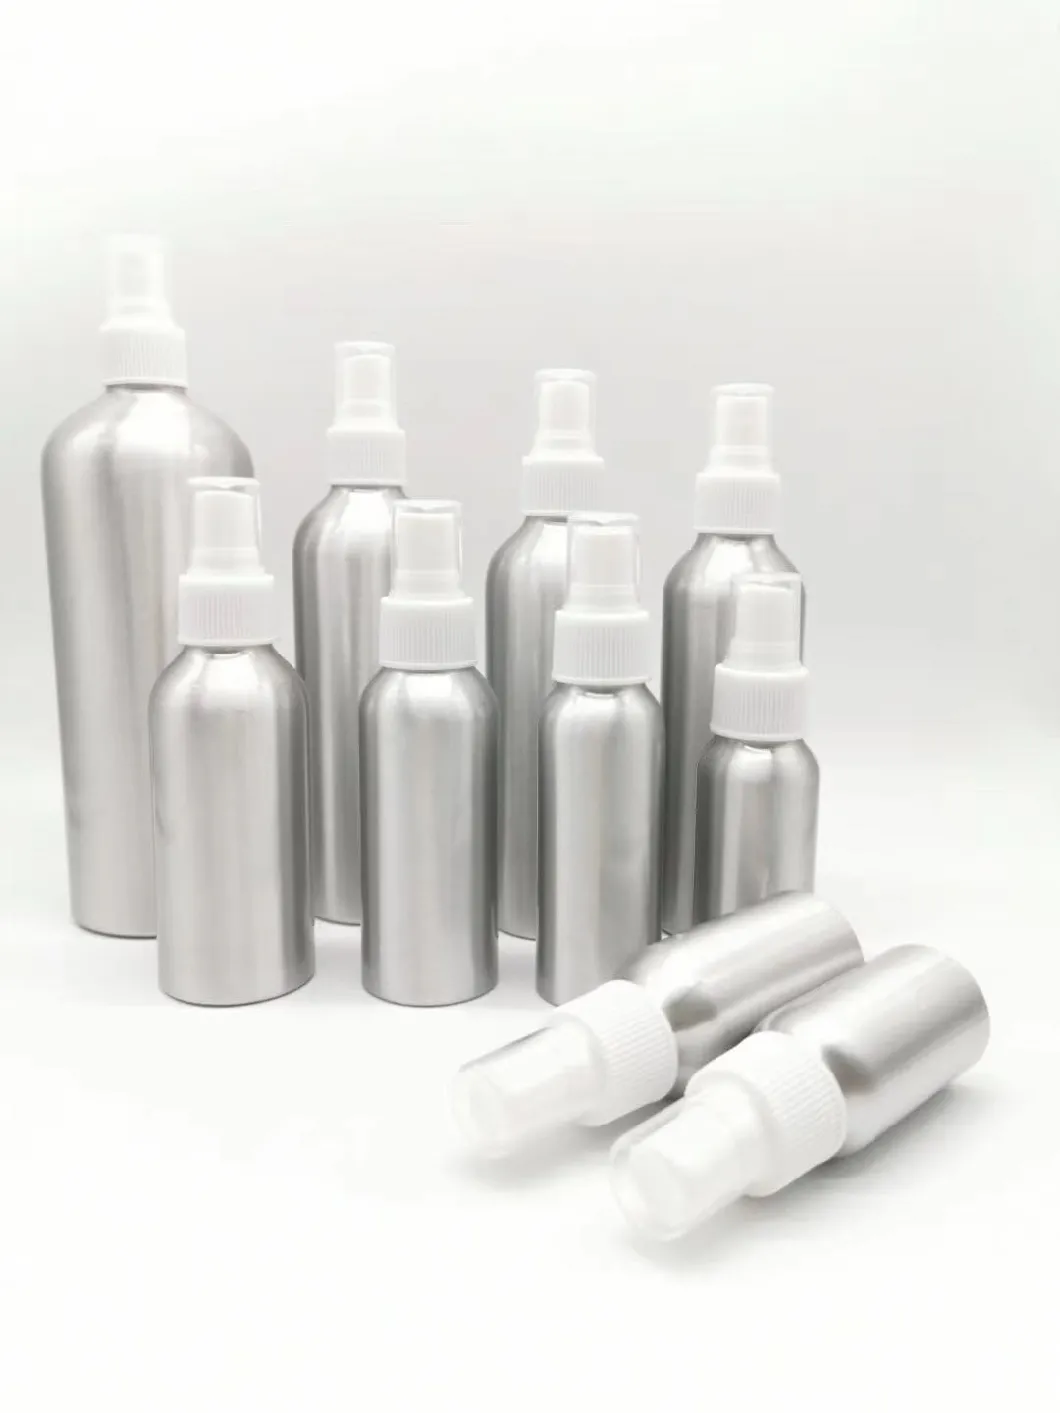 OEM Recyclable Food Grade Aluminum Cosmetic Bottle with Lotion Pump